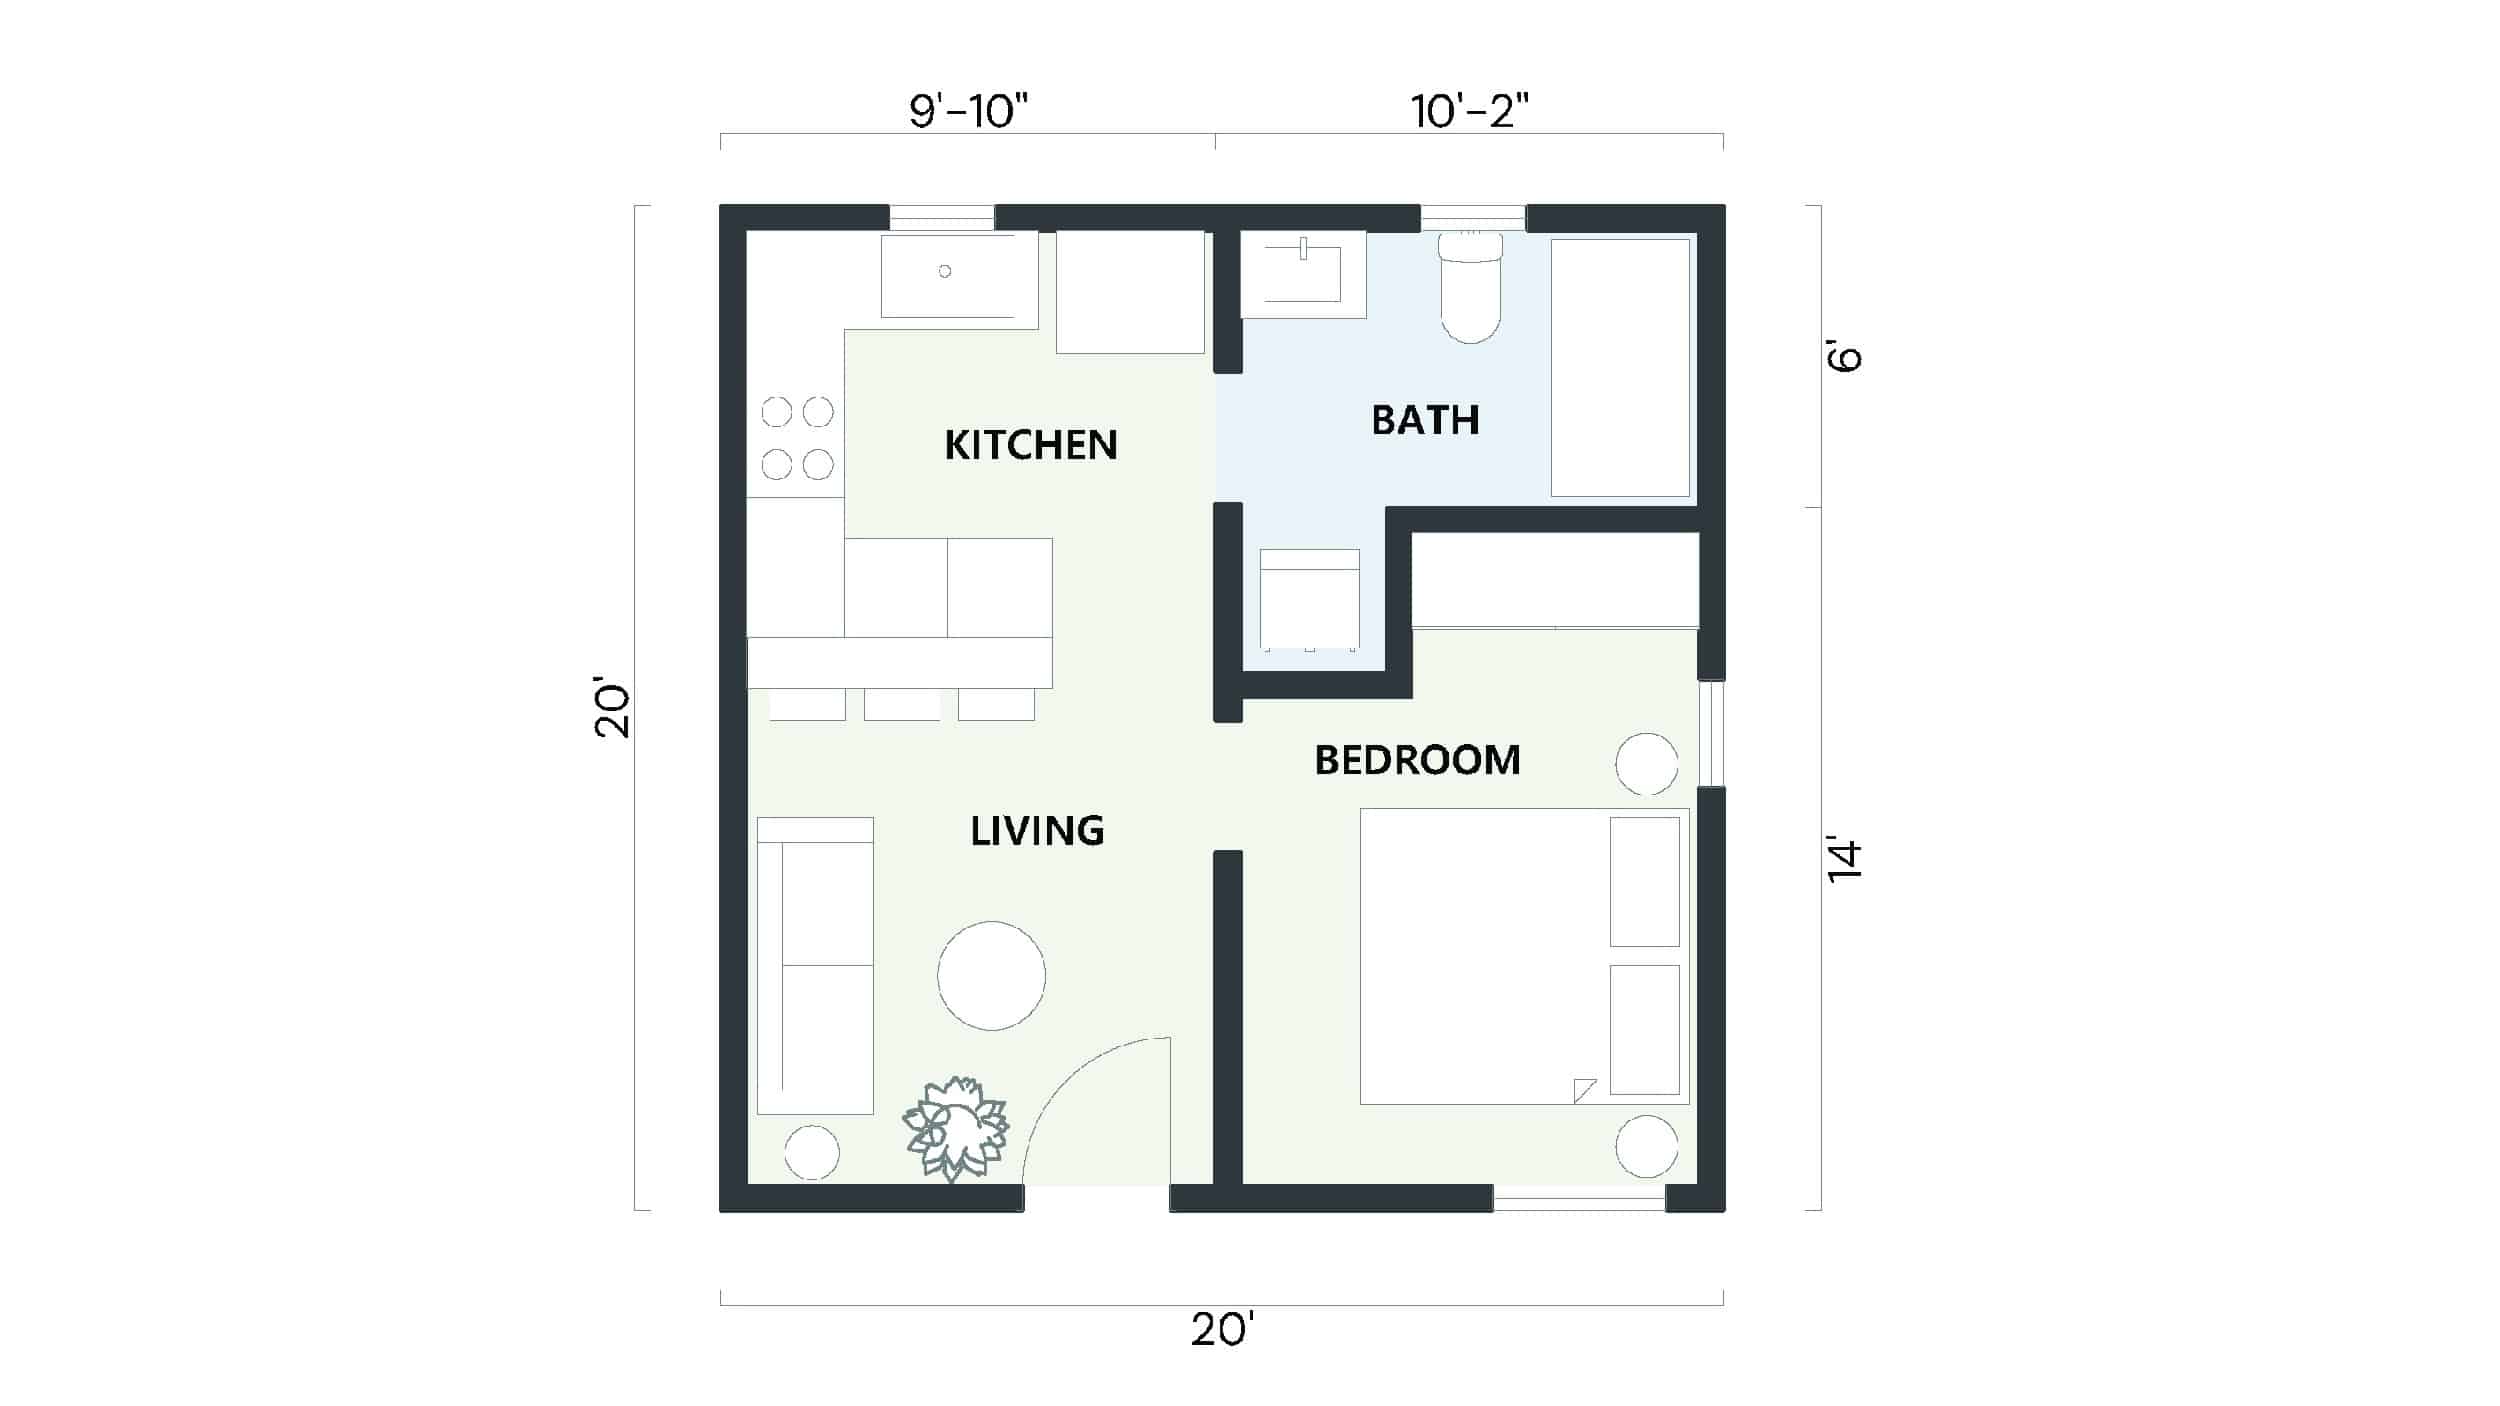 2D layout of a 400 sq ft ADU with one bedroom and one bath, optimized for stylish and simple living.